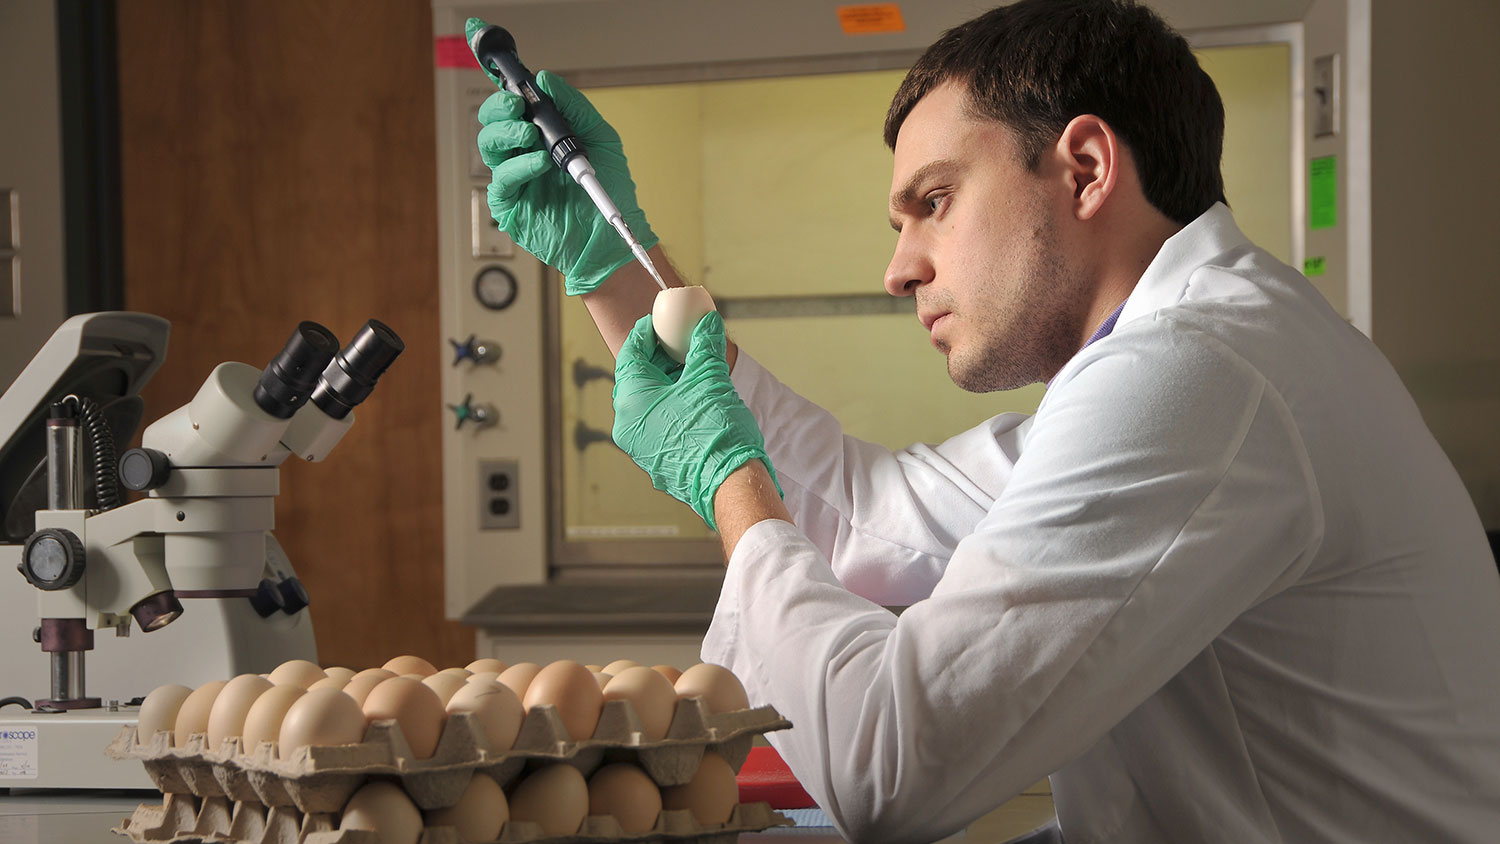 Researcher examining egg in labe